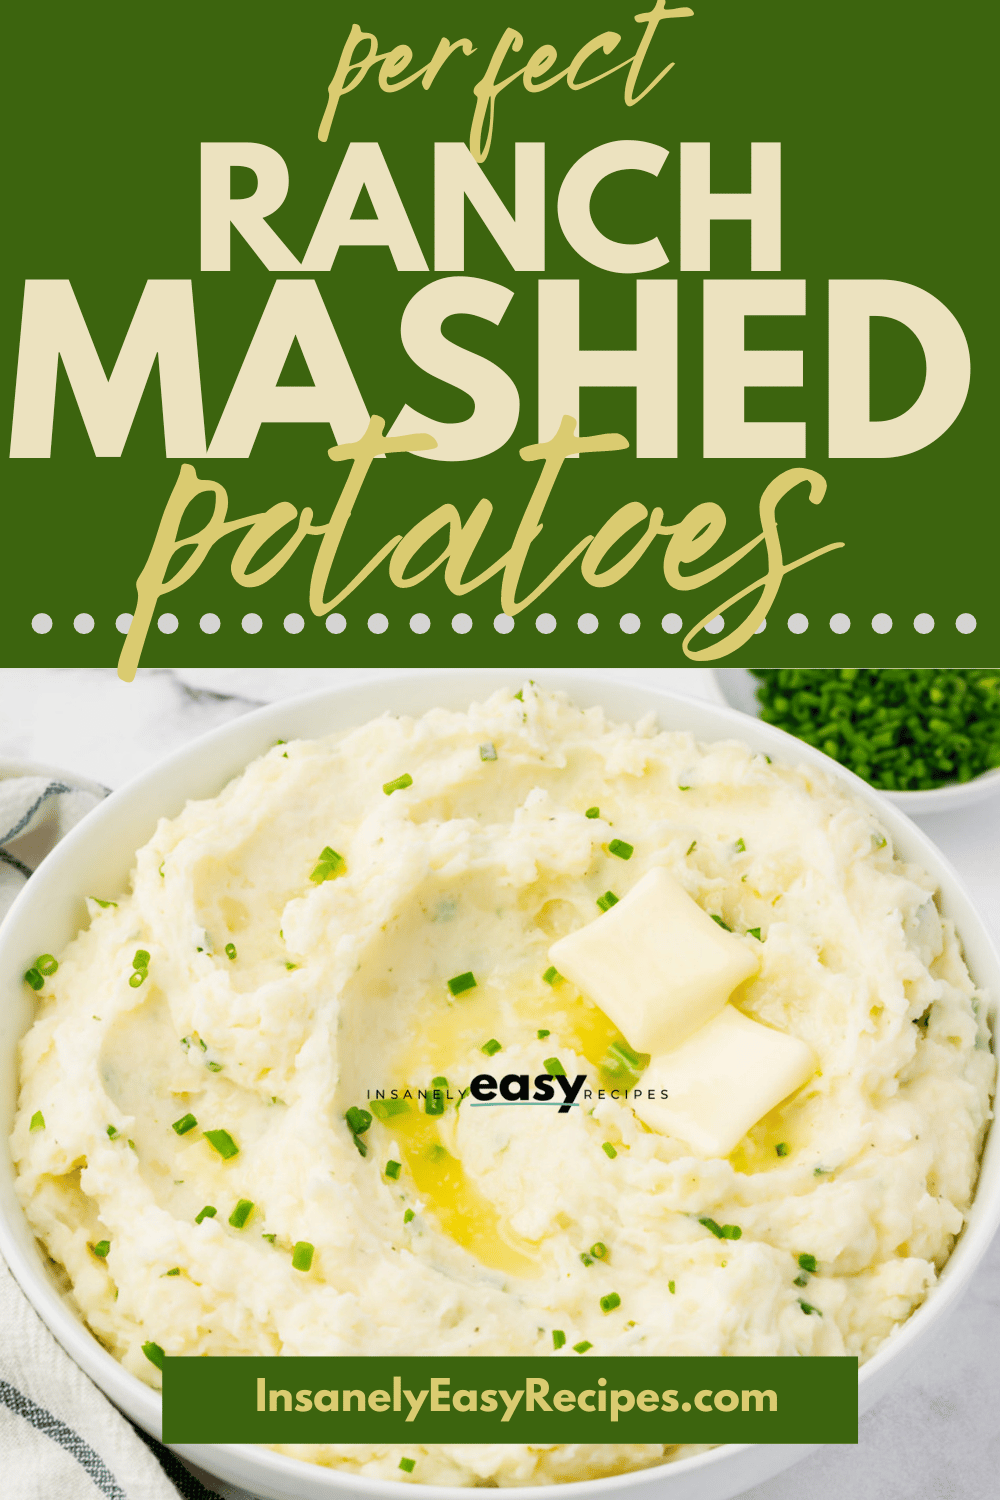 creamy ranch mashed potatoes in a white bowl. Potatoes have green seasoning on top and two butter pads with textoverlay perfect ranch mashed potatoes